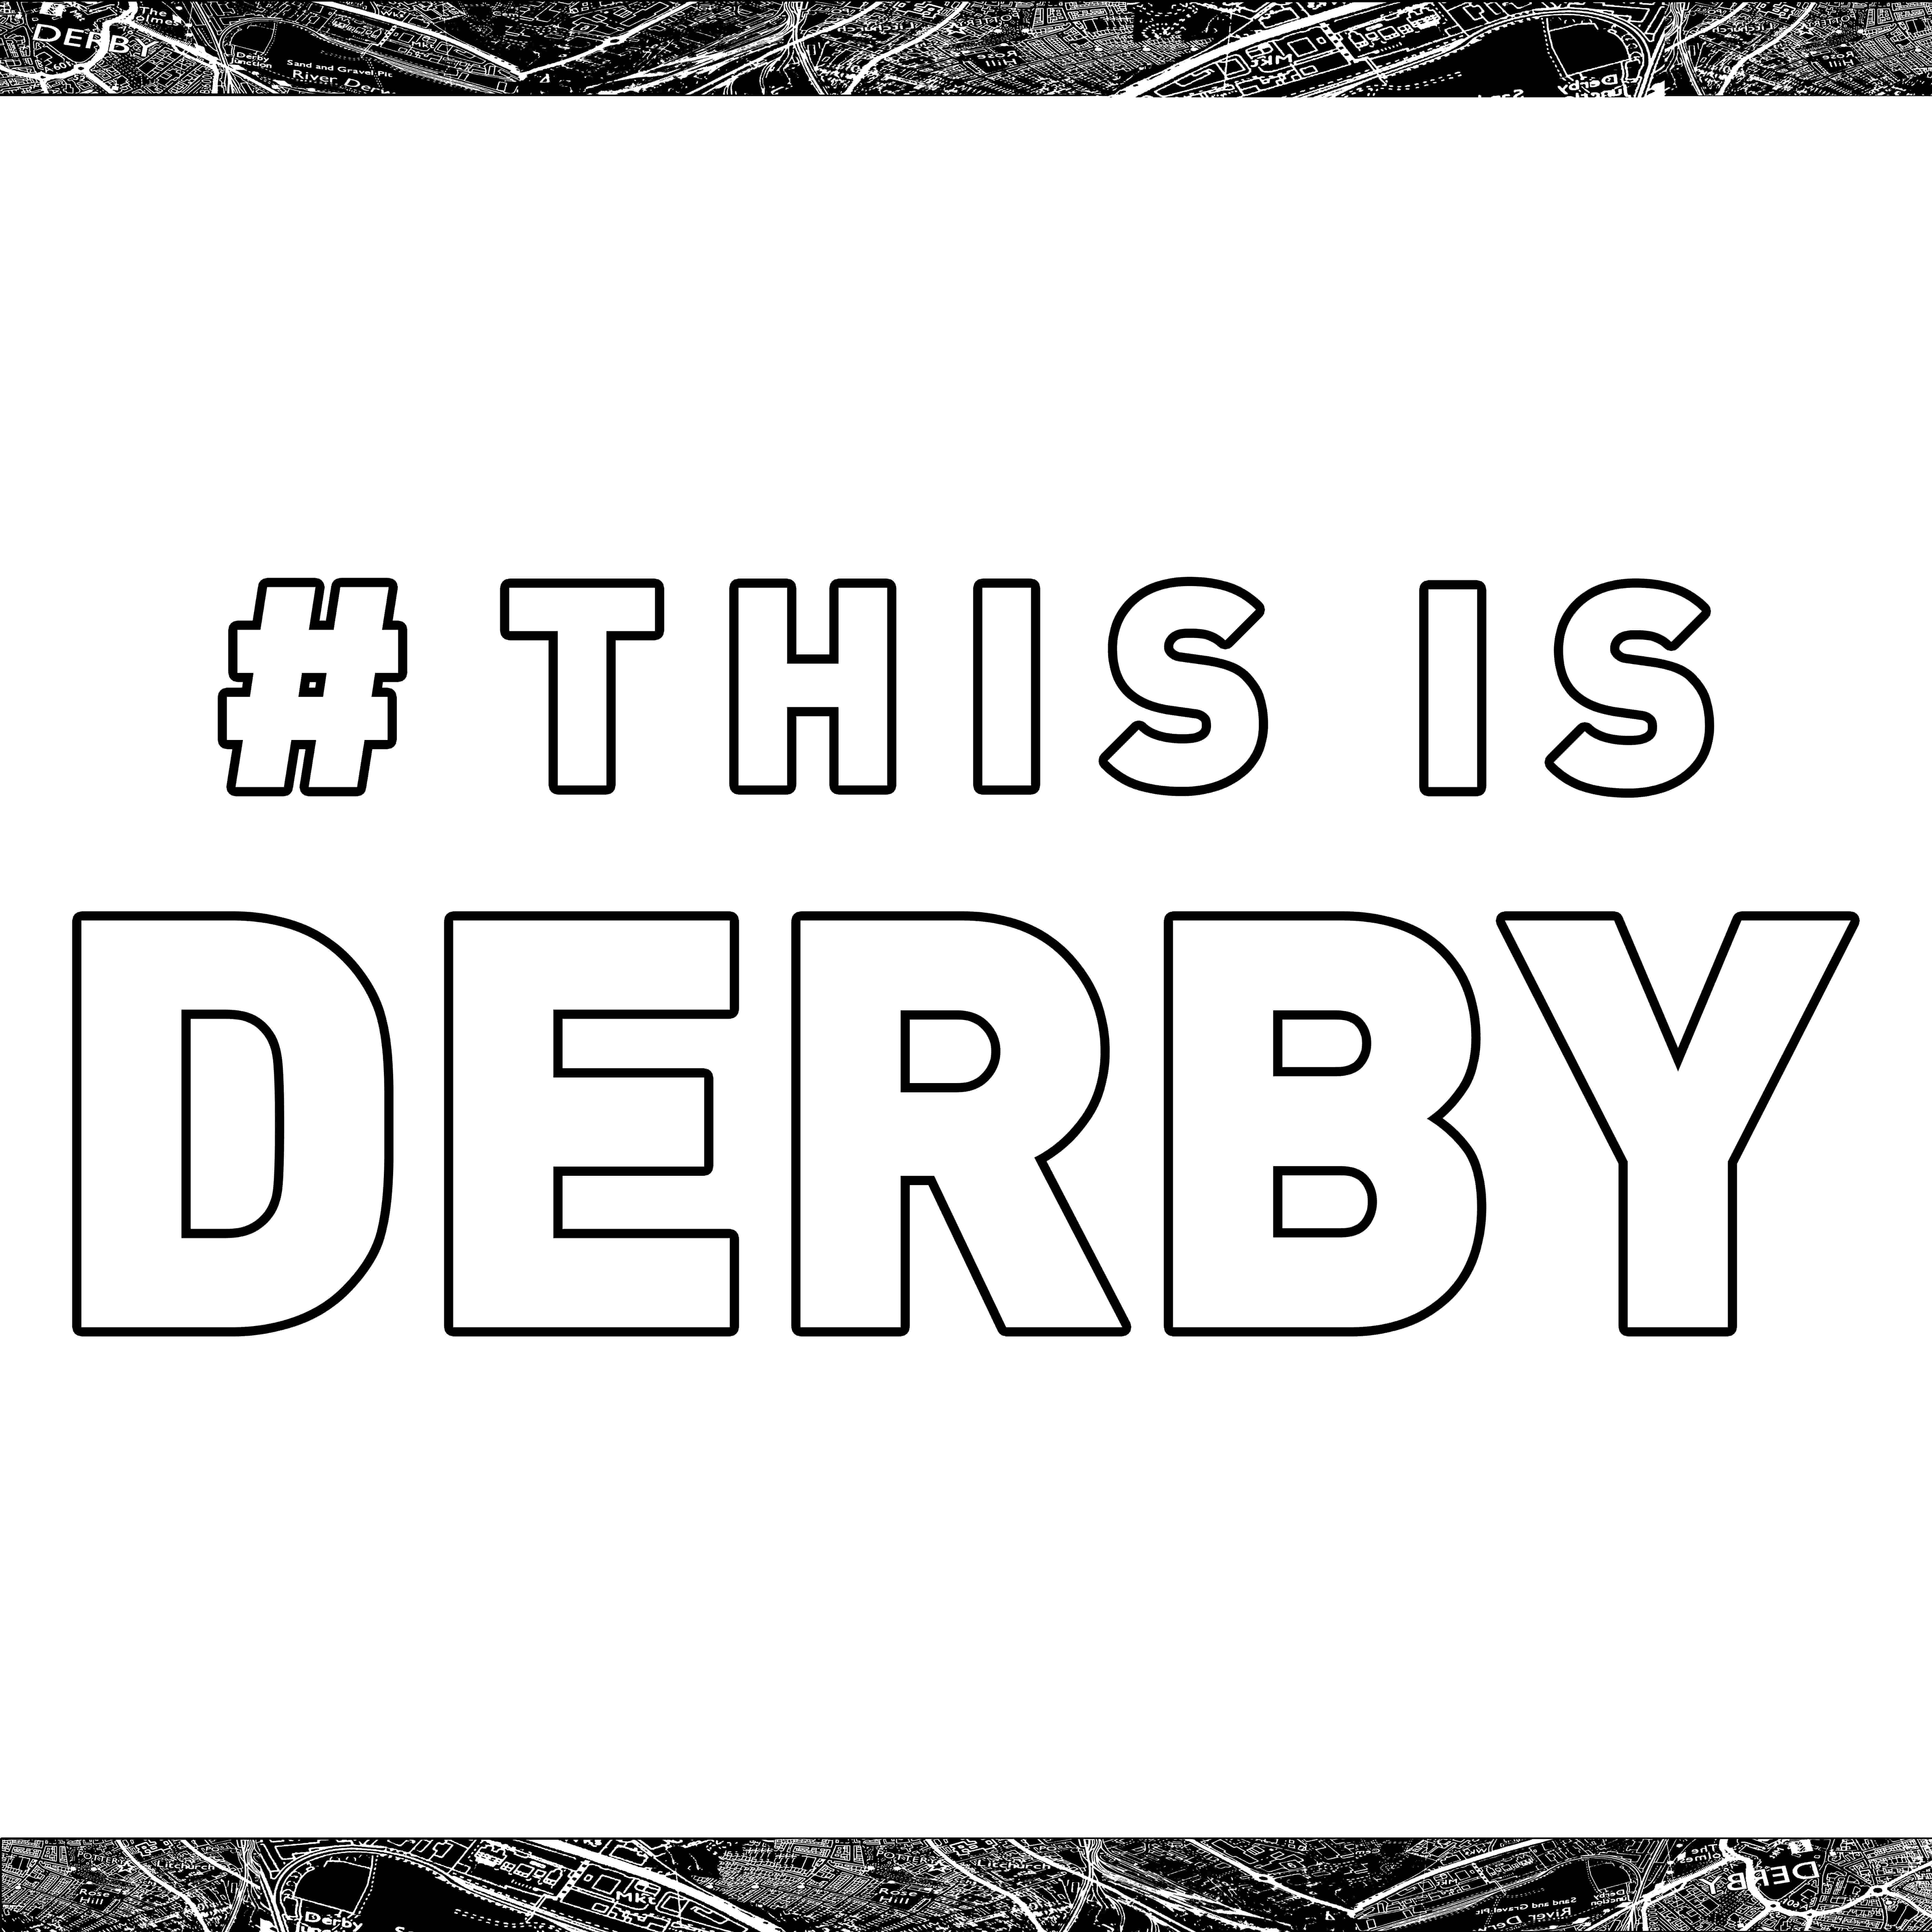 This is Derby